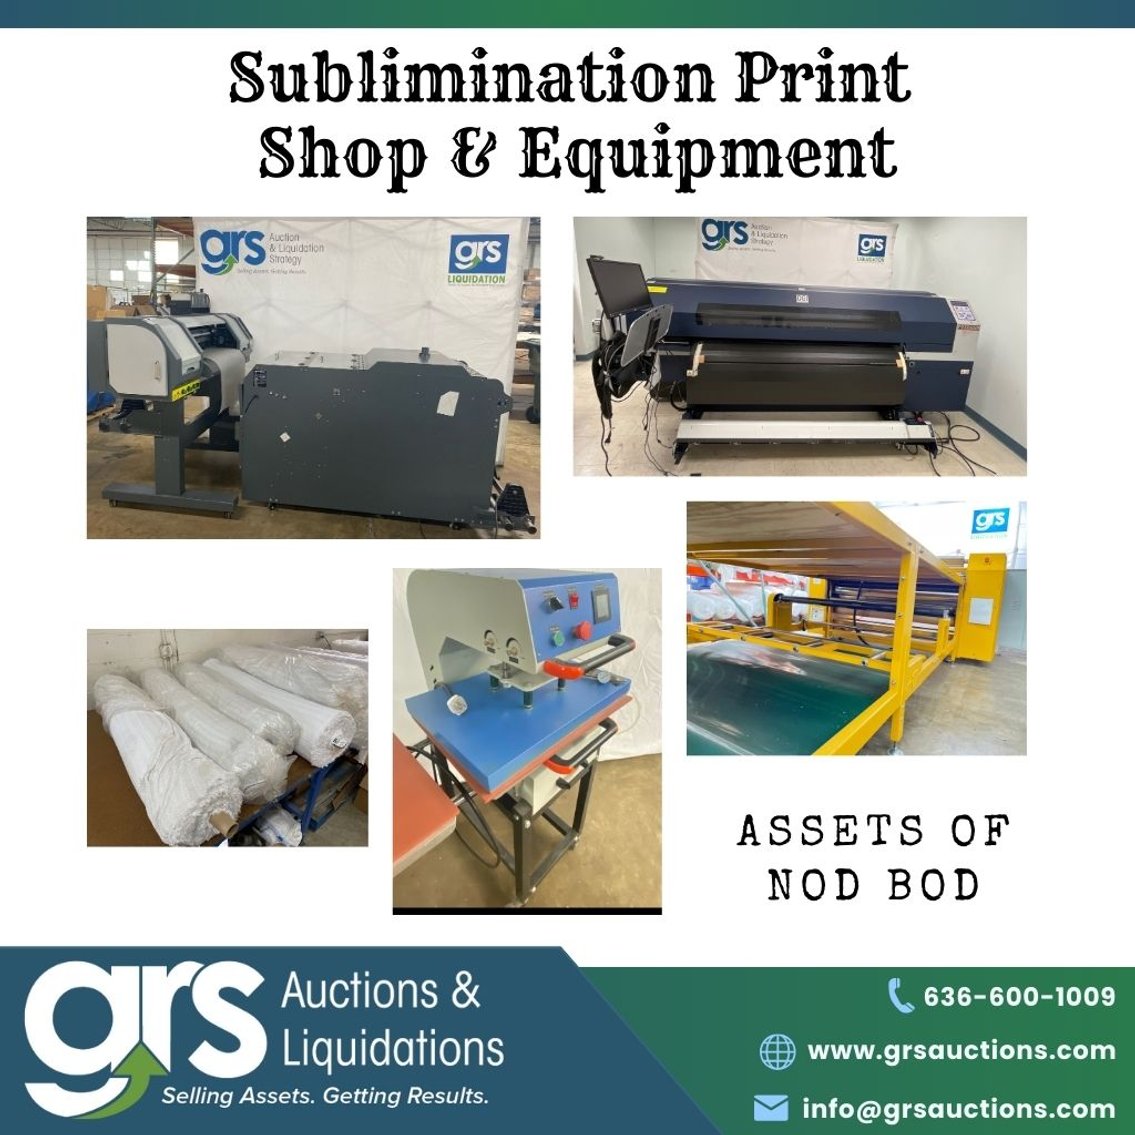 Sublimation Printing Equipment - Assets of NODBOD